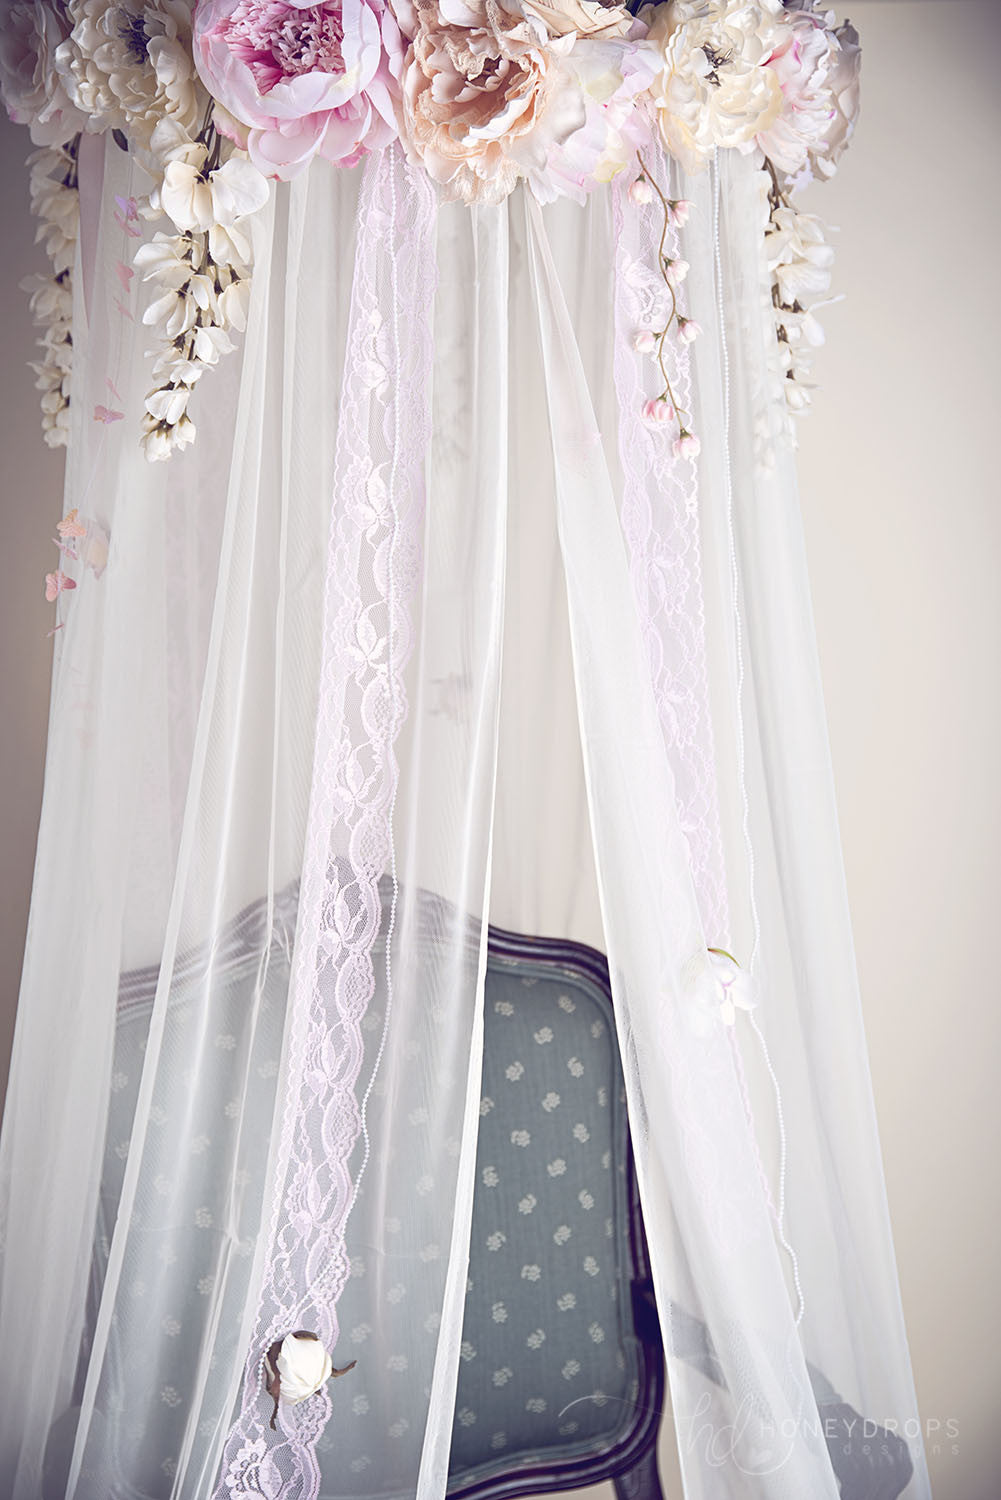 Dreamy Whimsical Floral Canopy Girls Room Decor - Honeydrops Designs